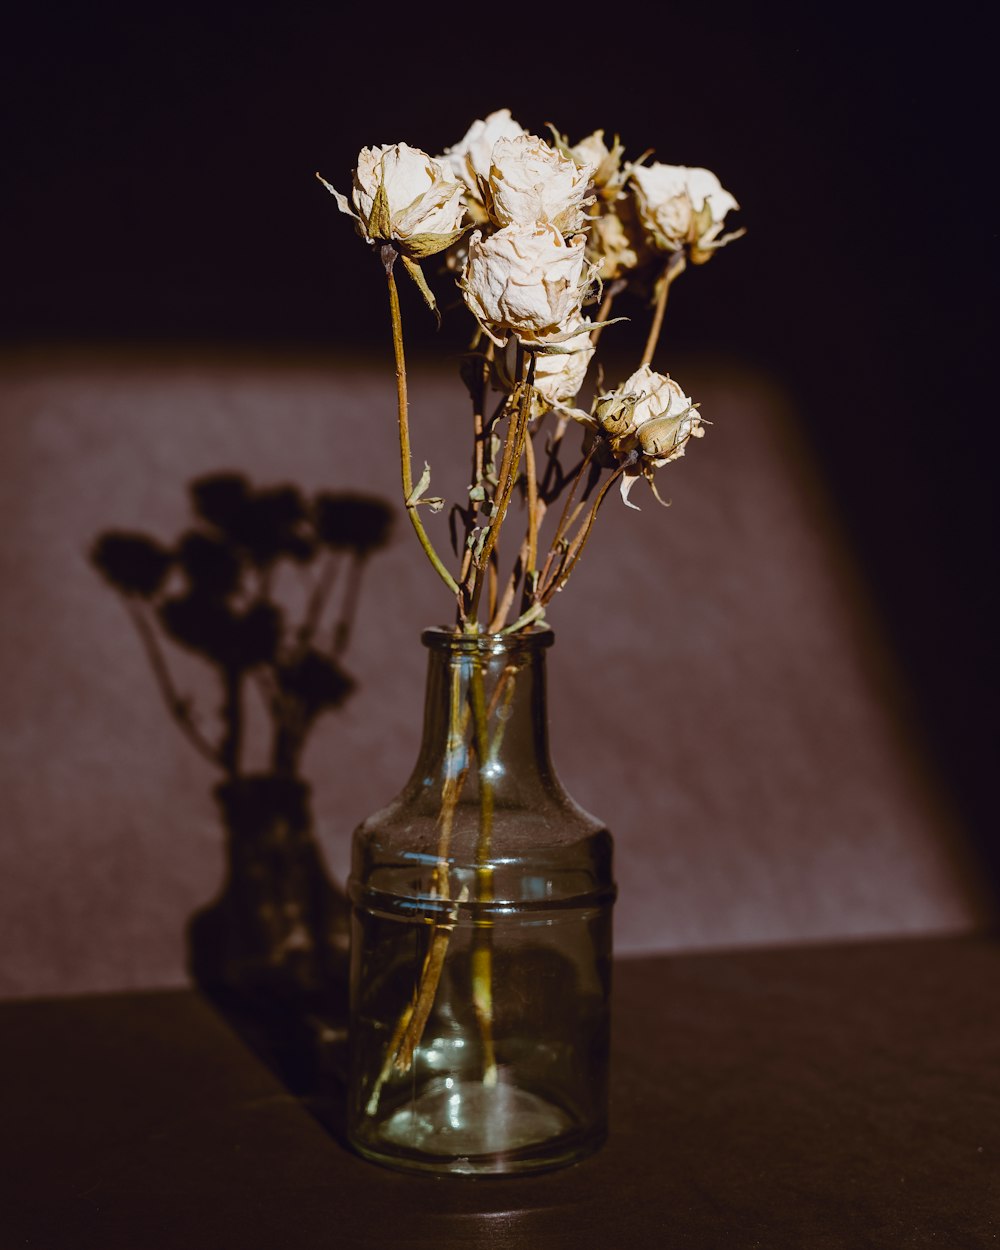 white roses in clear glass vase